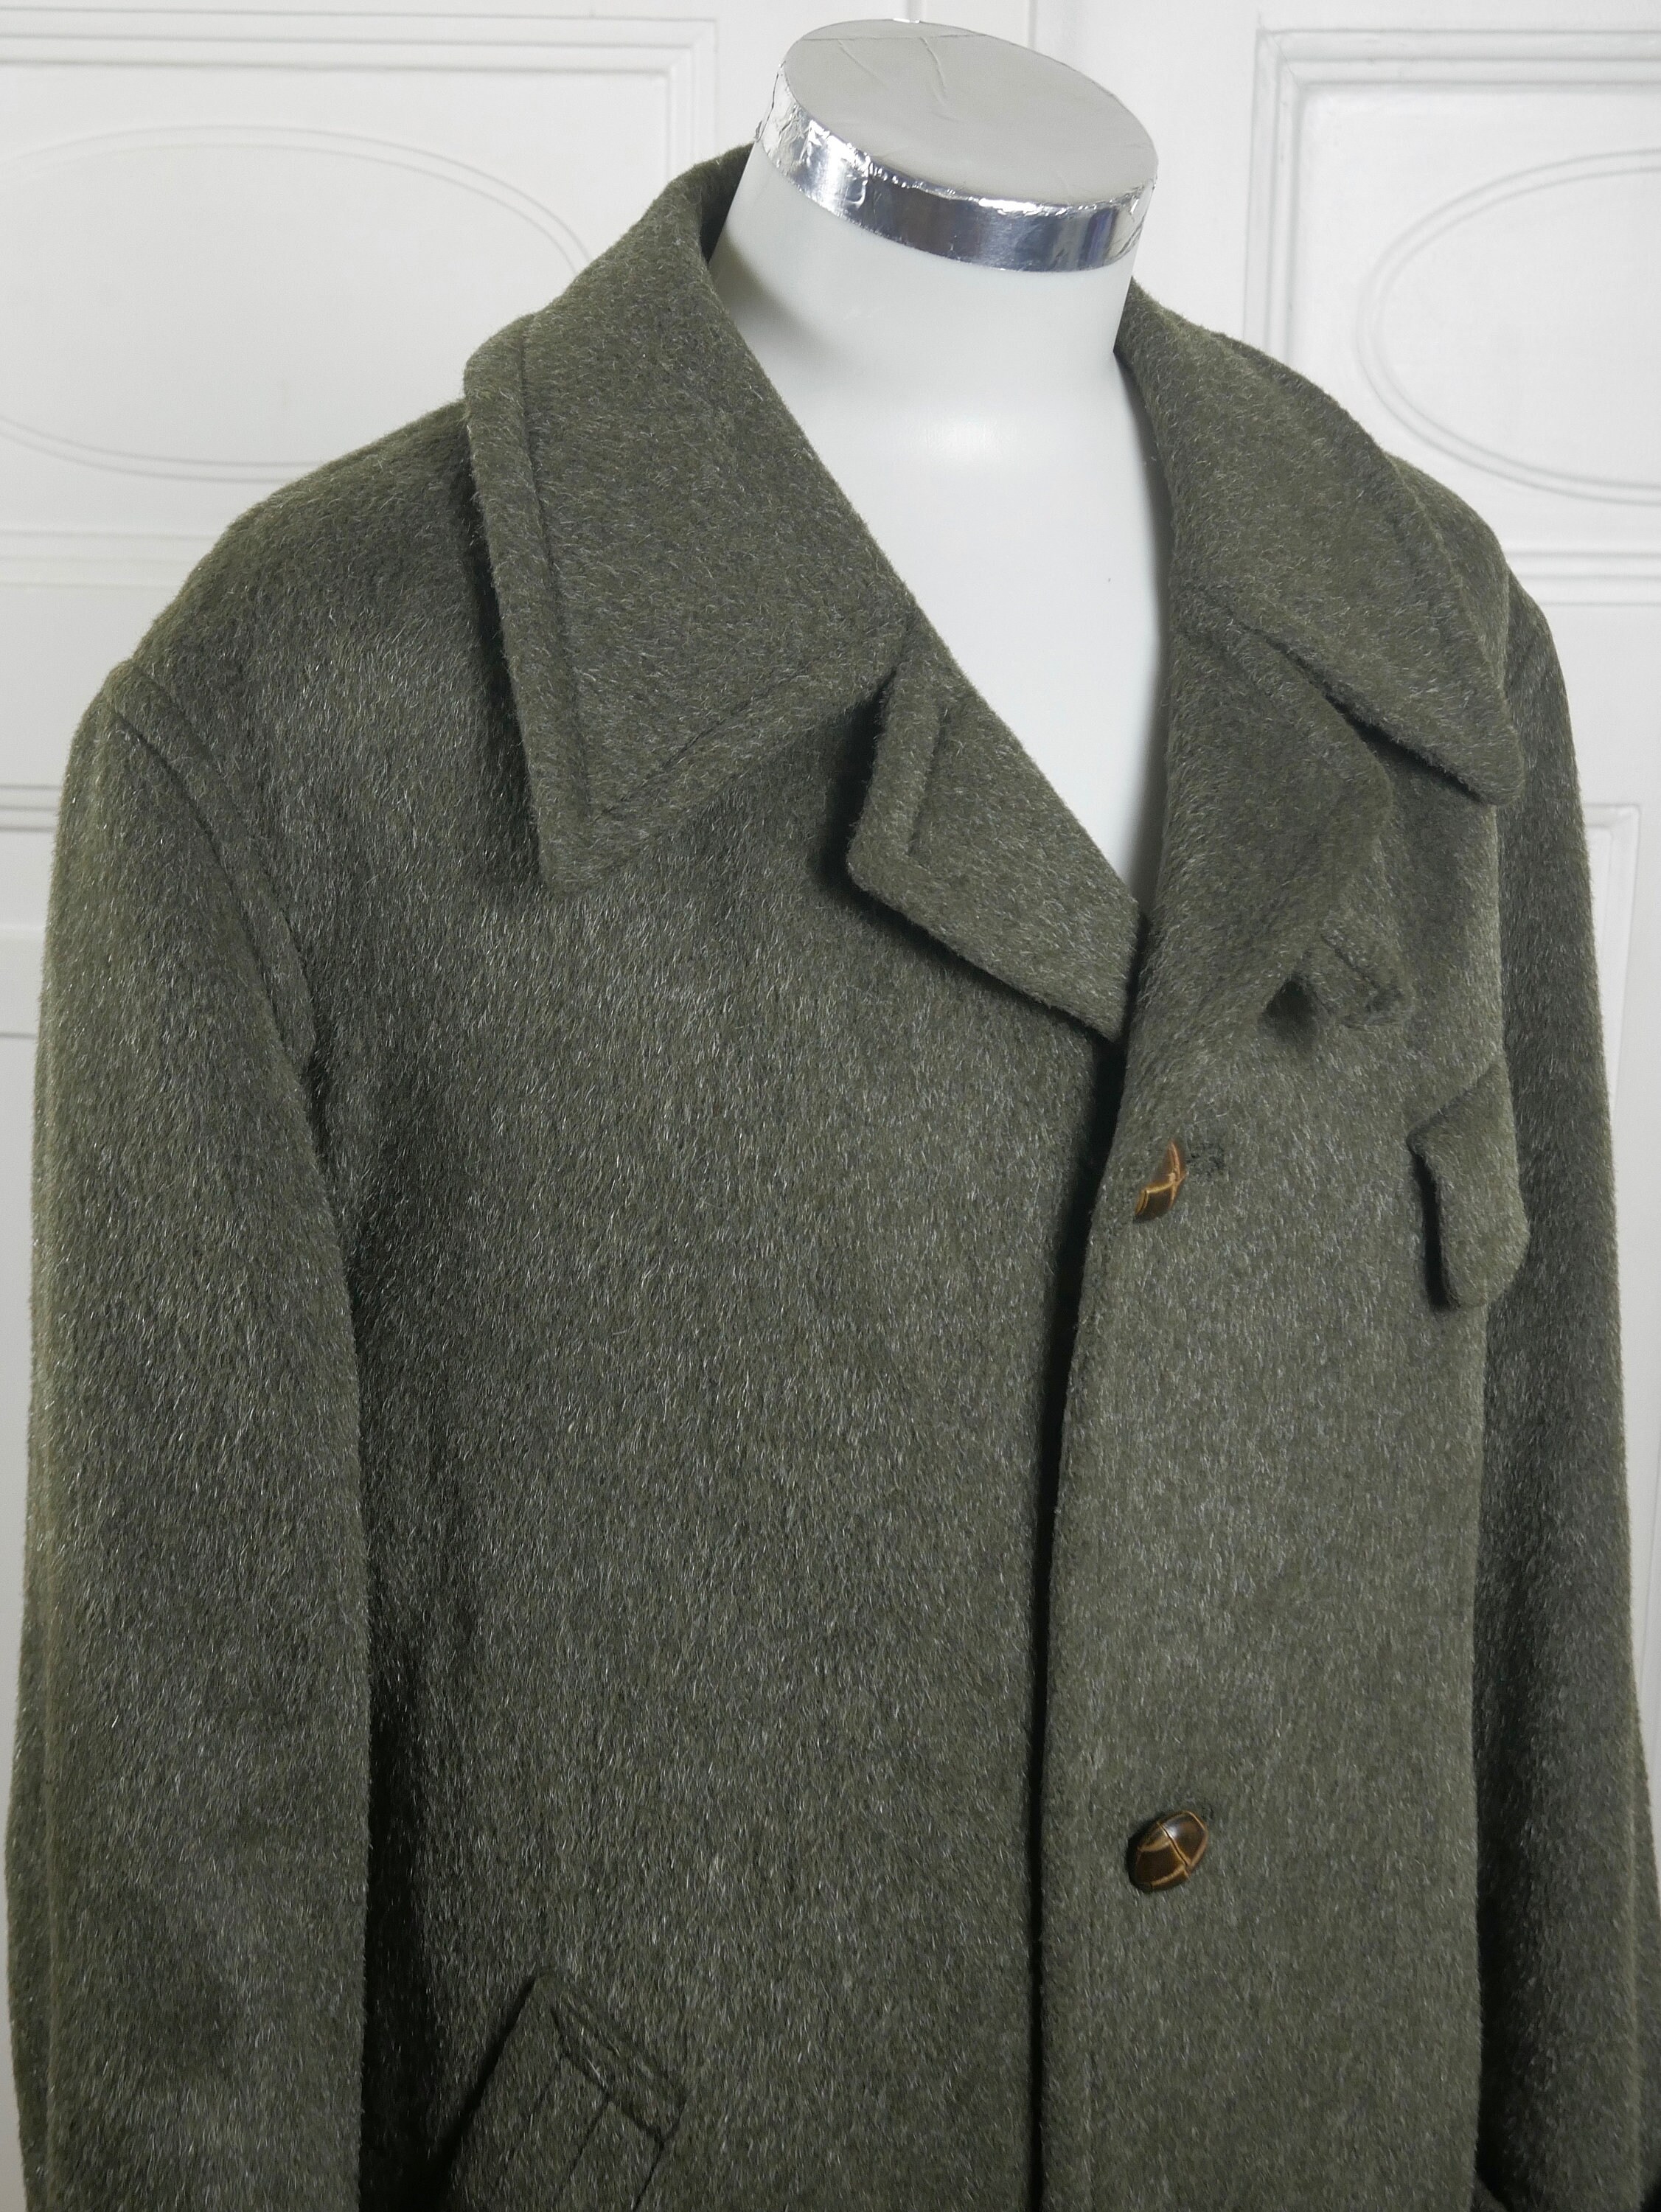 Olive Green Wool Overcoat 1980s German Vintage Car Coat with | Etsy